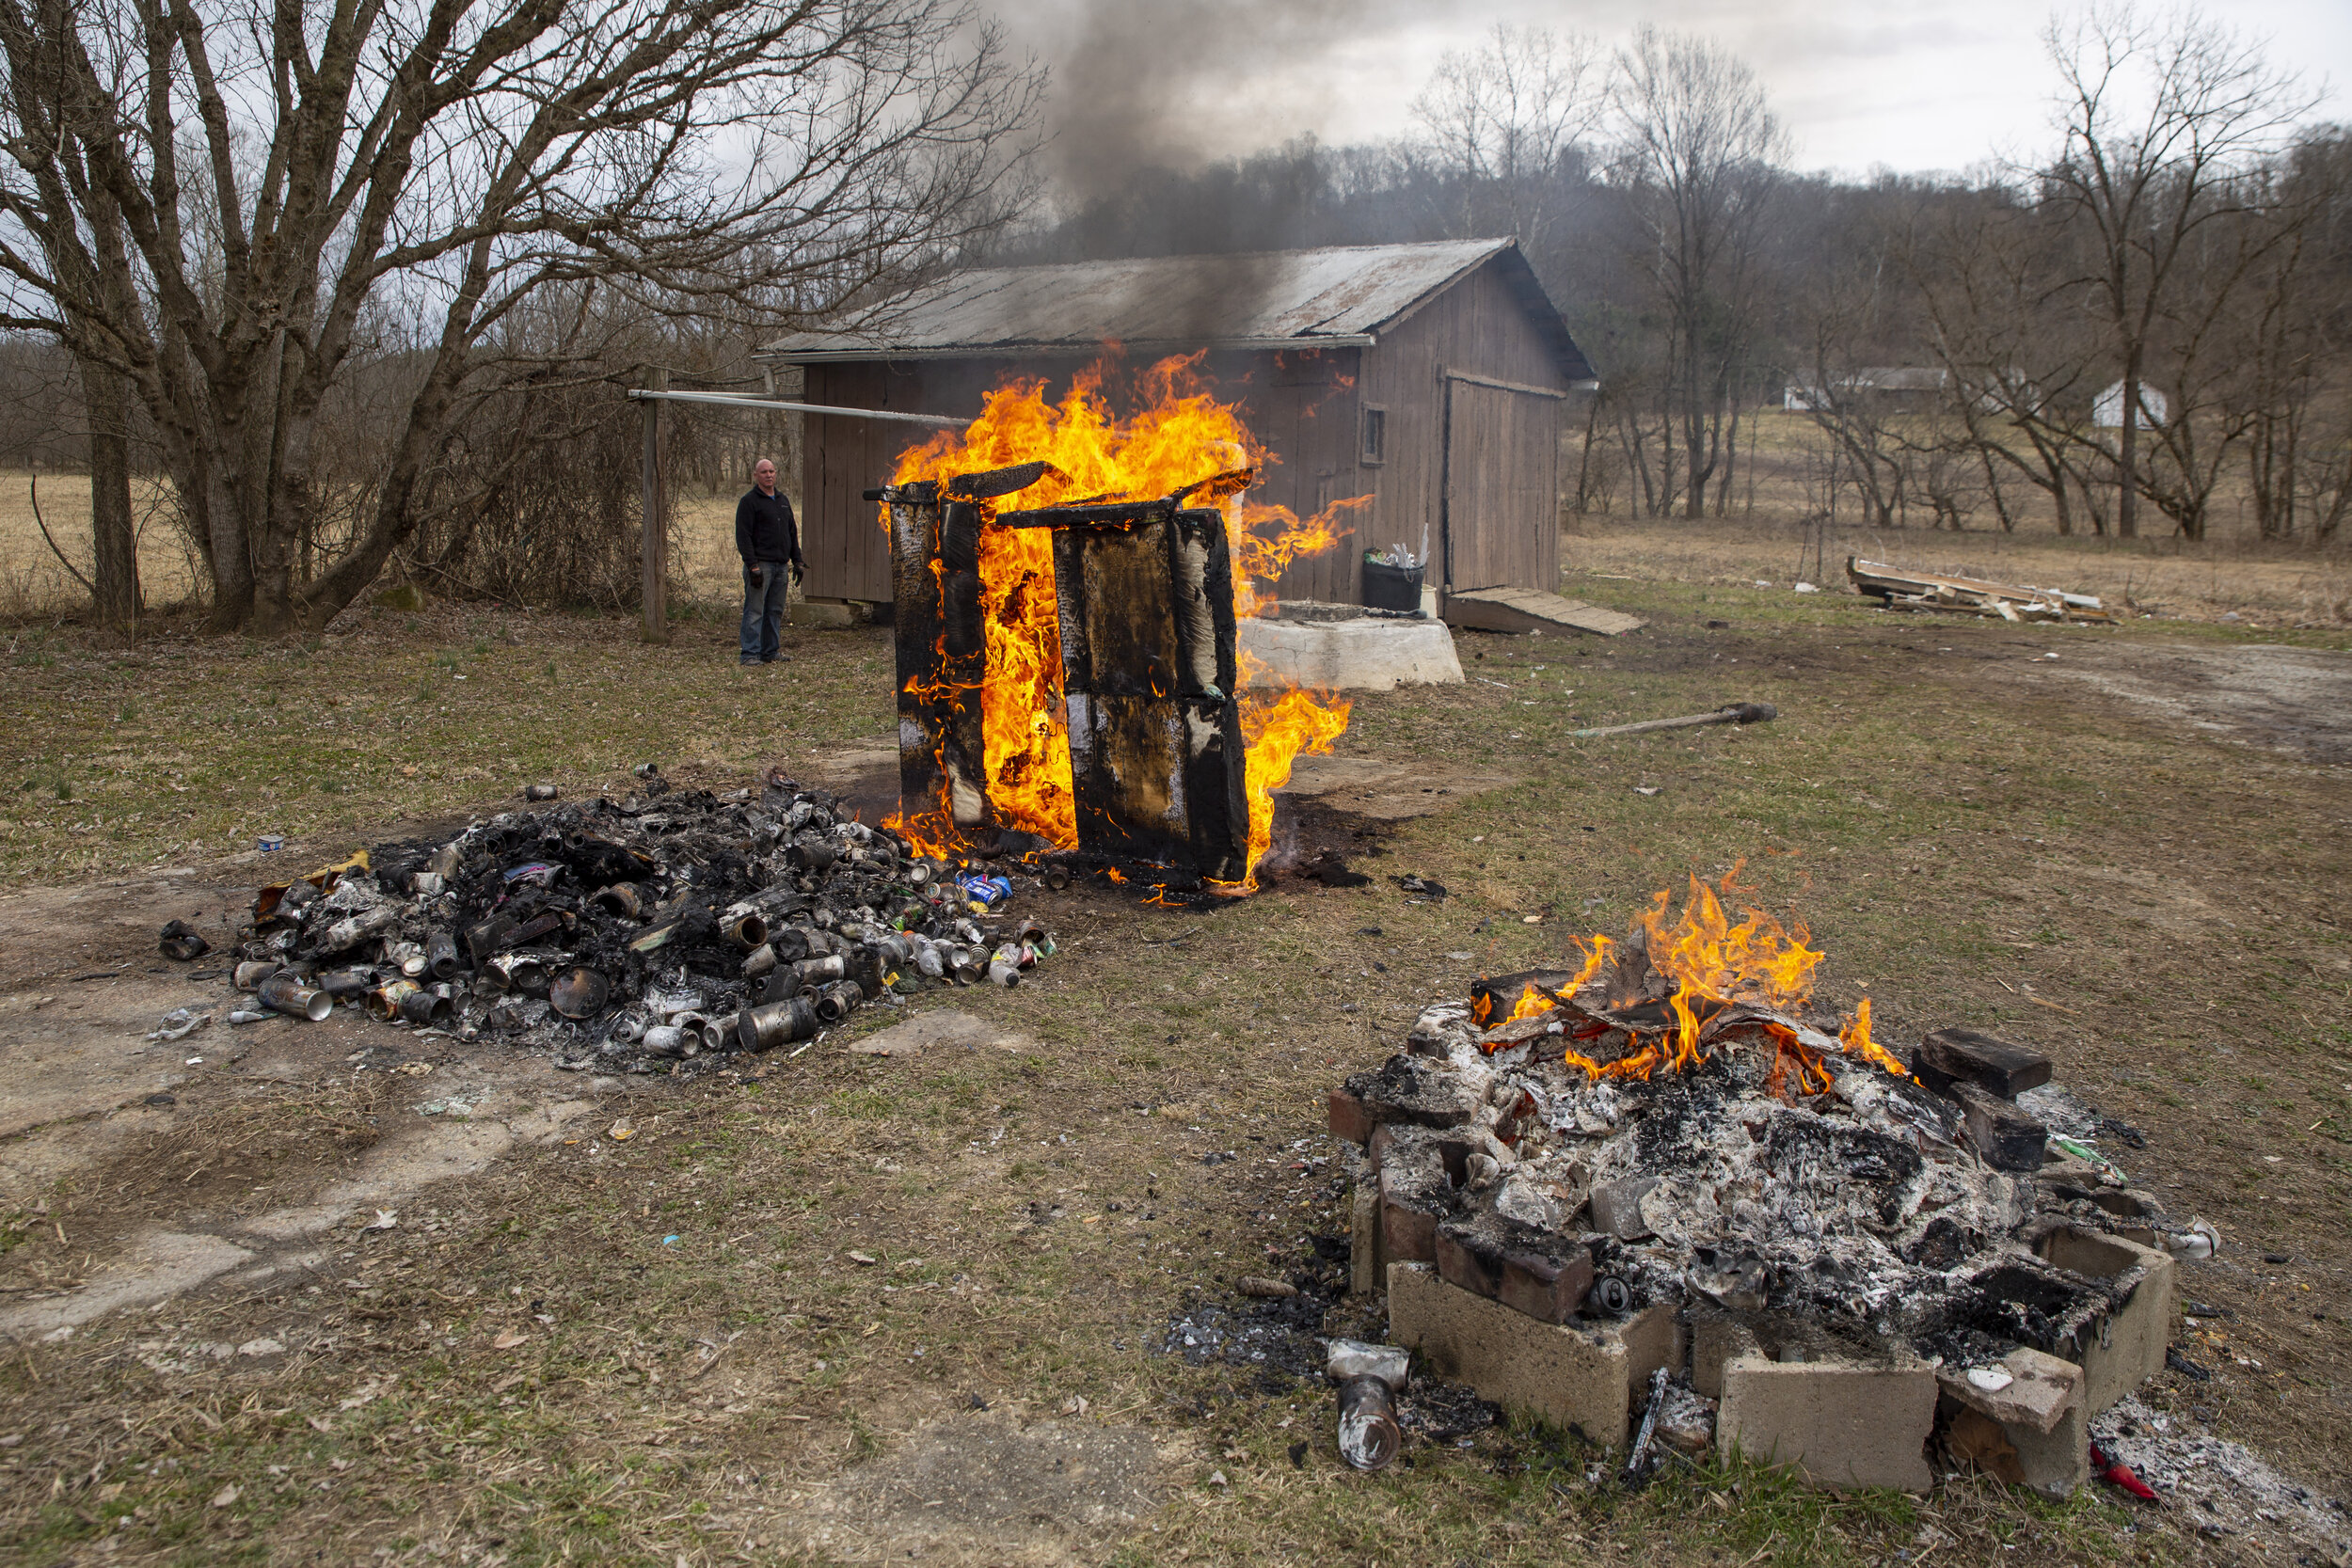  With no municipal garbage service, residents of Sharpsburg often burn their trash.  